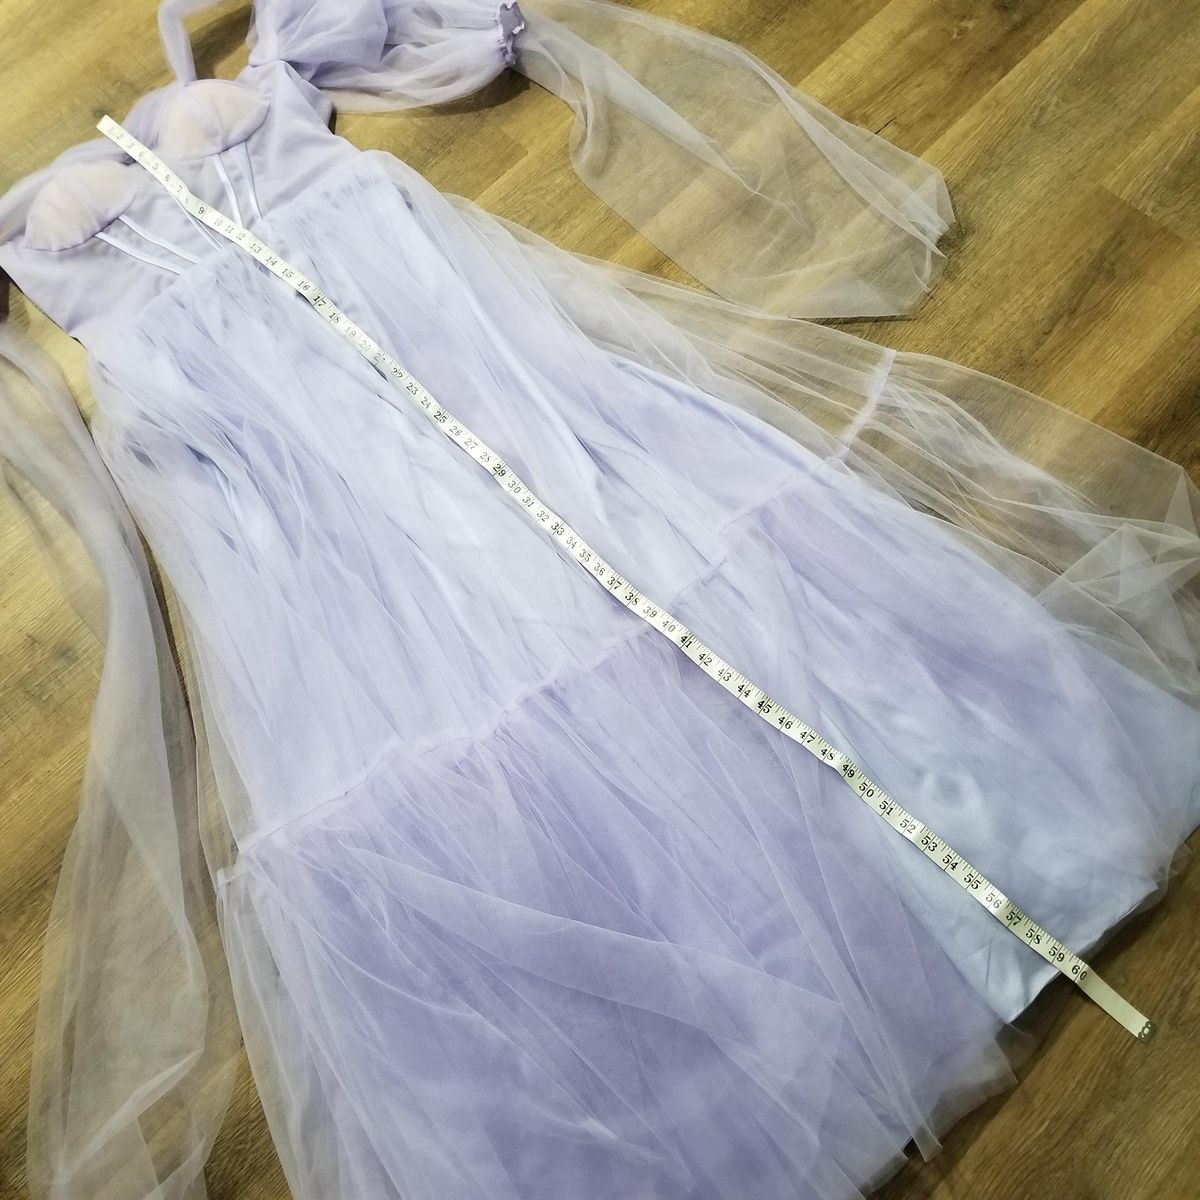 Dupe of Milla "Ocean Wave" Size 8 Sheer Purple Ball Gown on Queenly